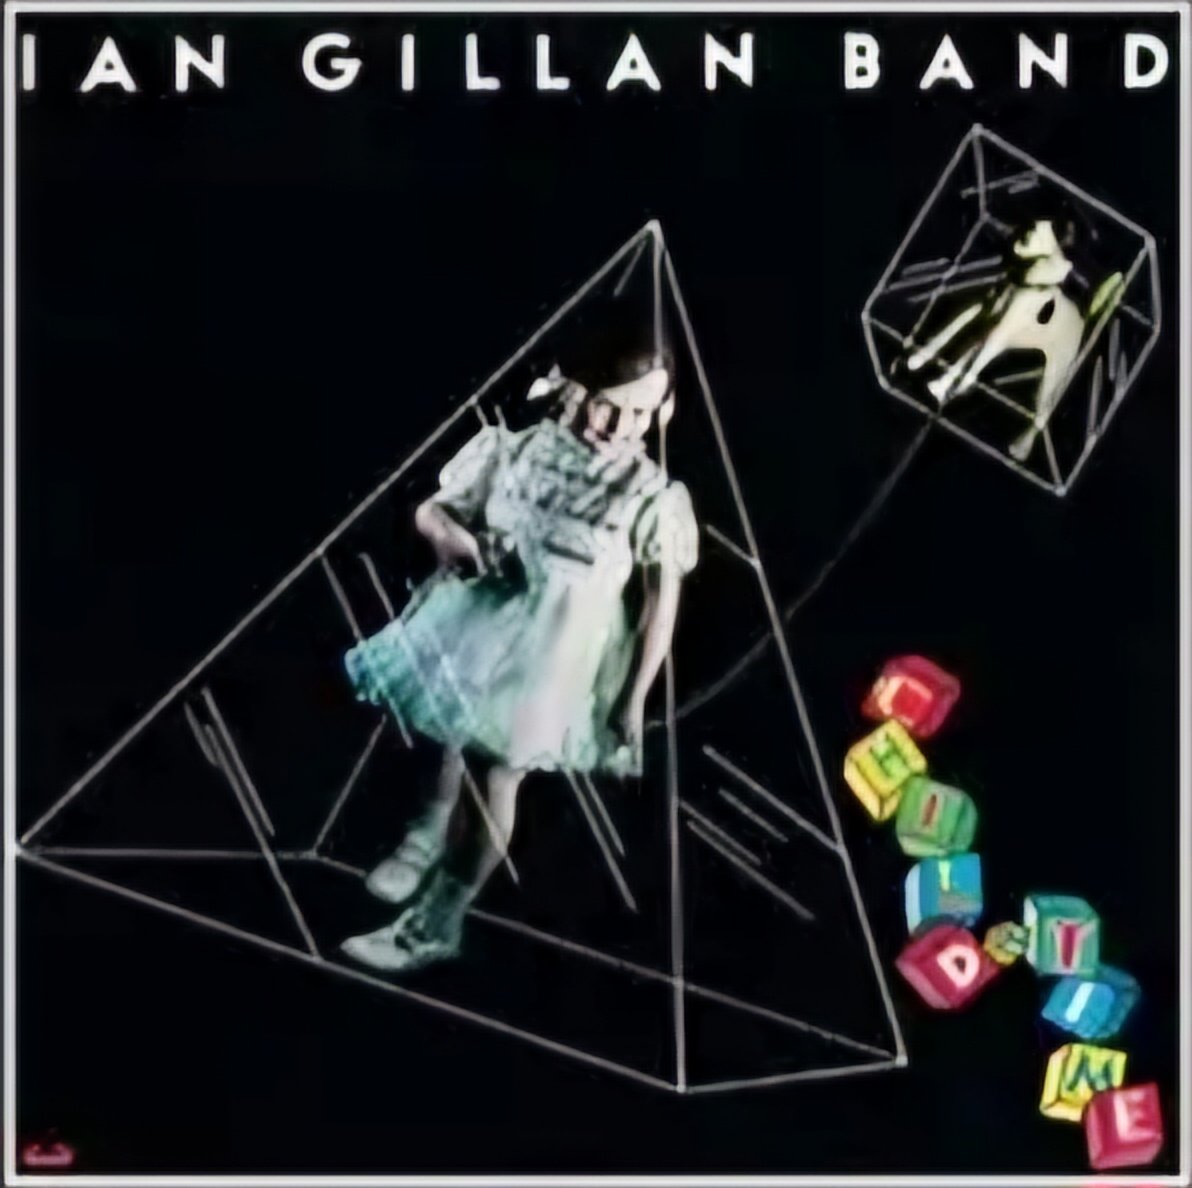 Now playing... Ian Gillan Band 'Child In Time' (1976) ...and we hope you like our new direction